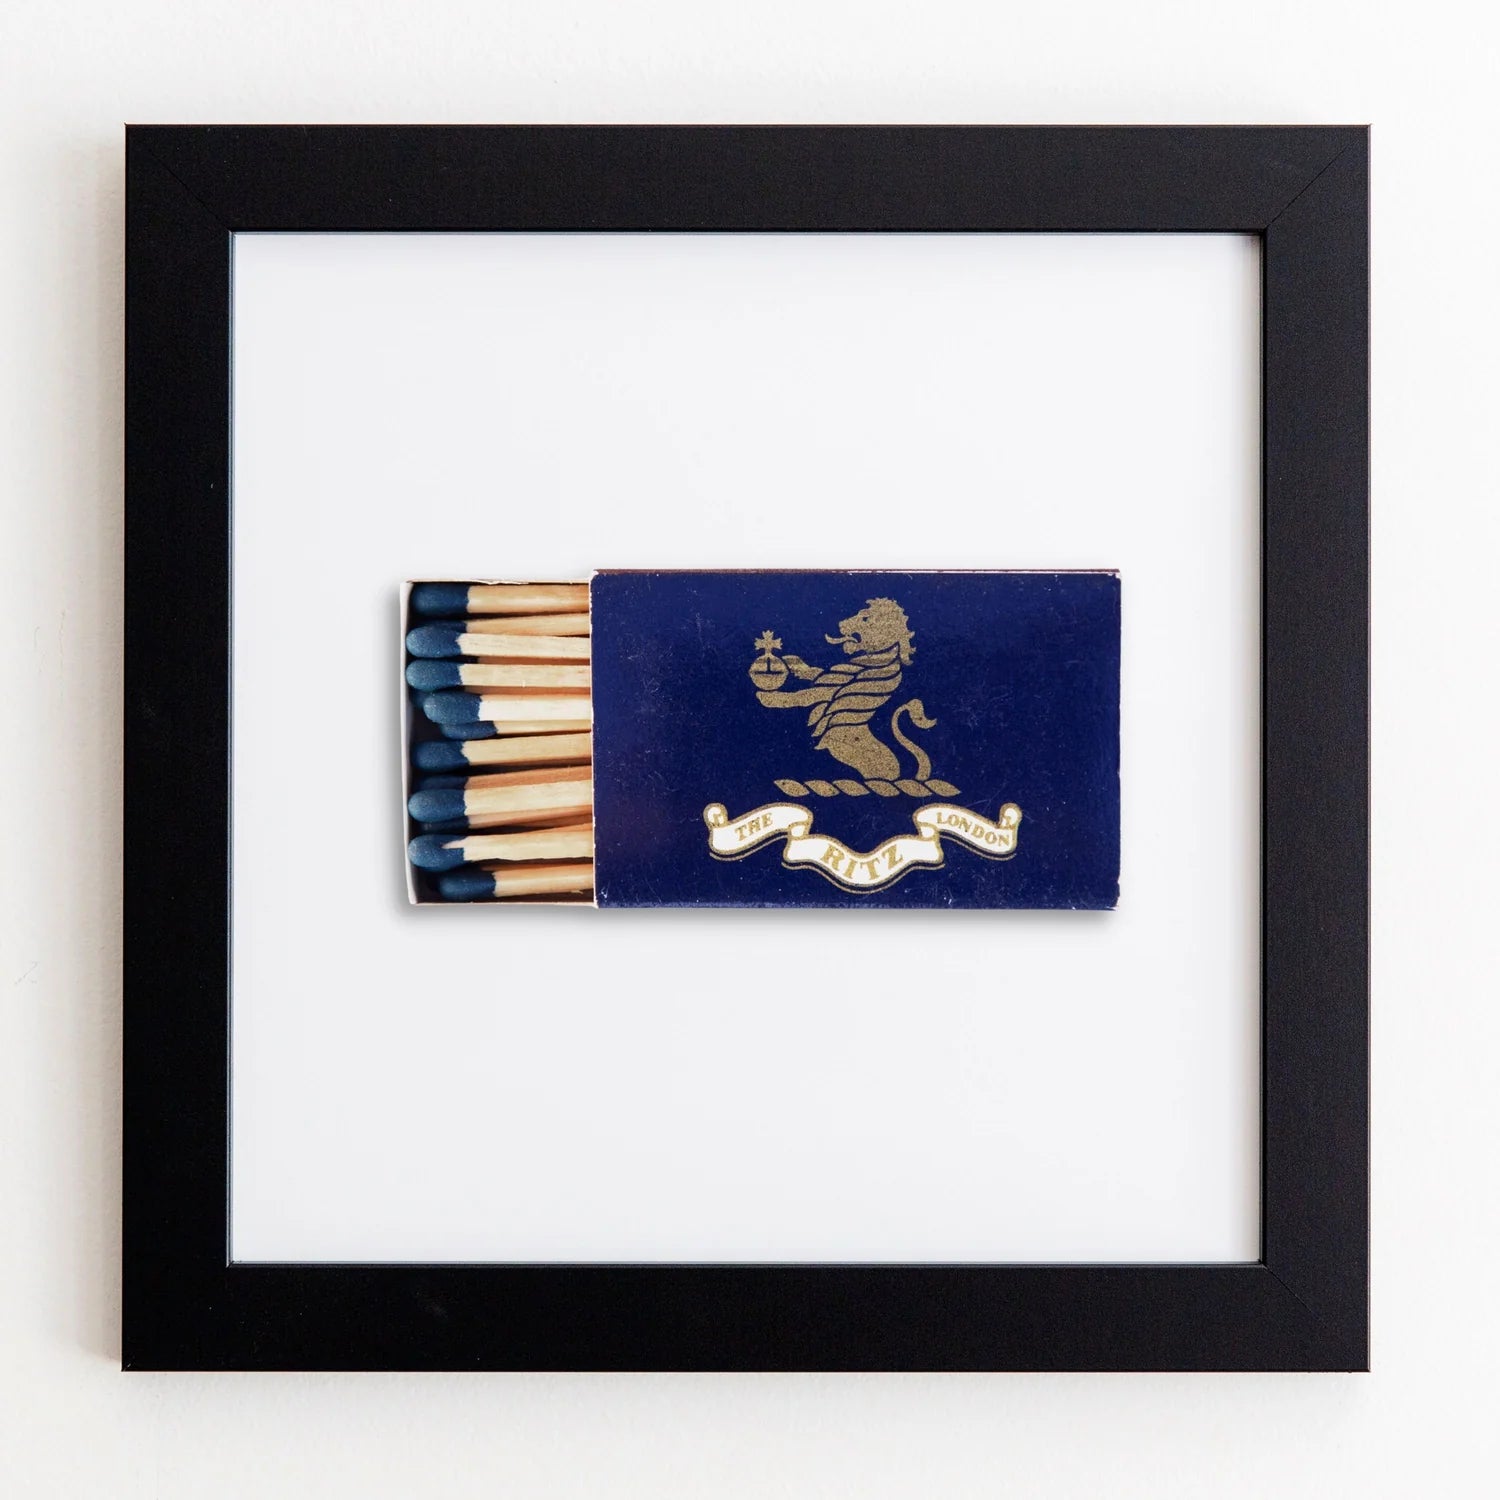 A framed artwork featuring a blue Match South matchbook with a gold lion emblem, open to display several matches, against a white acrylic background in an Art Square Black Frame.